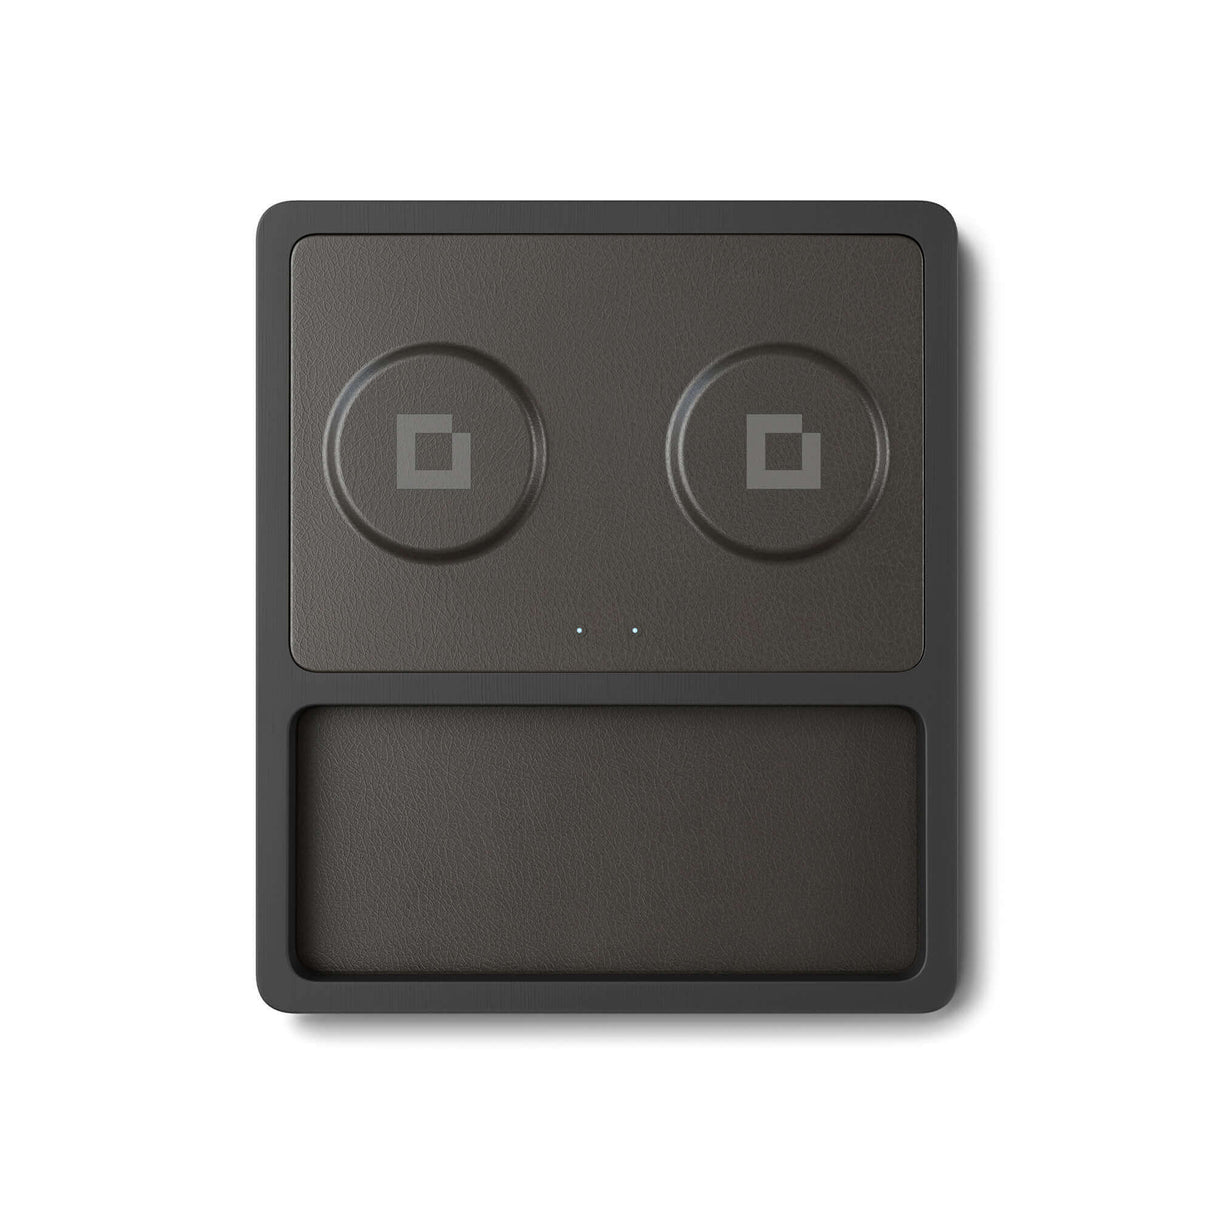 DUO TRAY Black - 2-in-1 MagSafe Midnight Black Wireless Charger with USB-C and A Ports Support